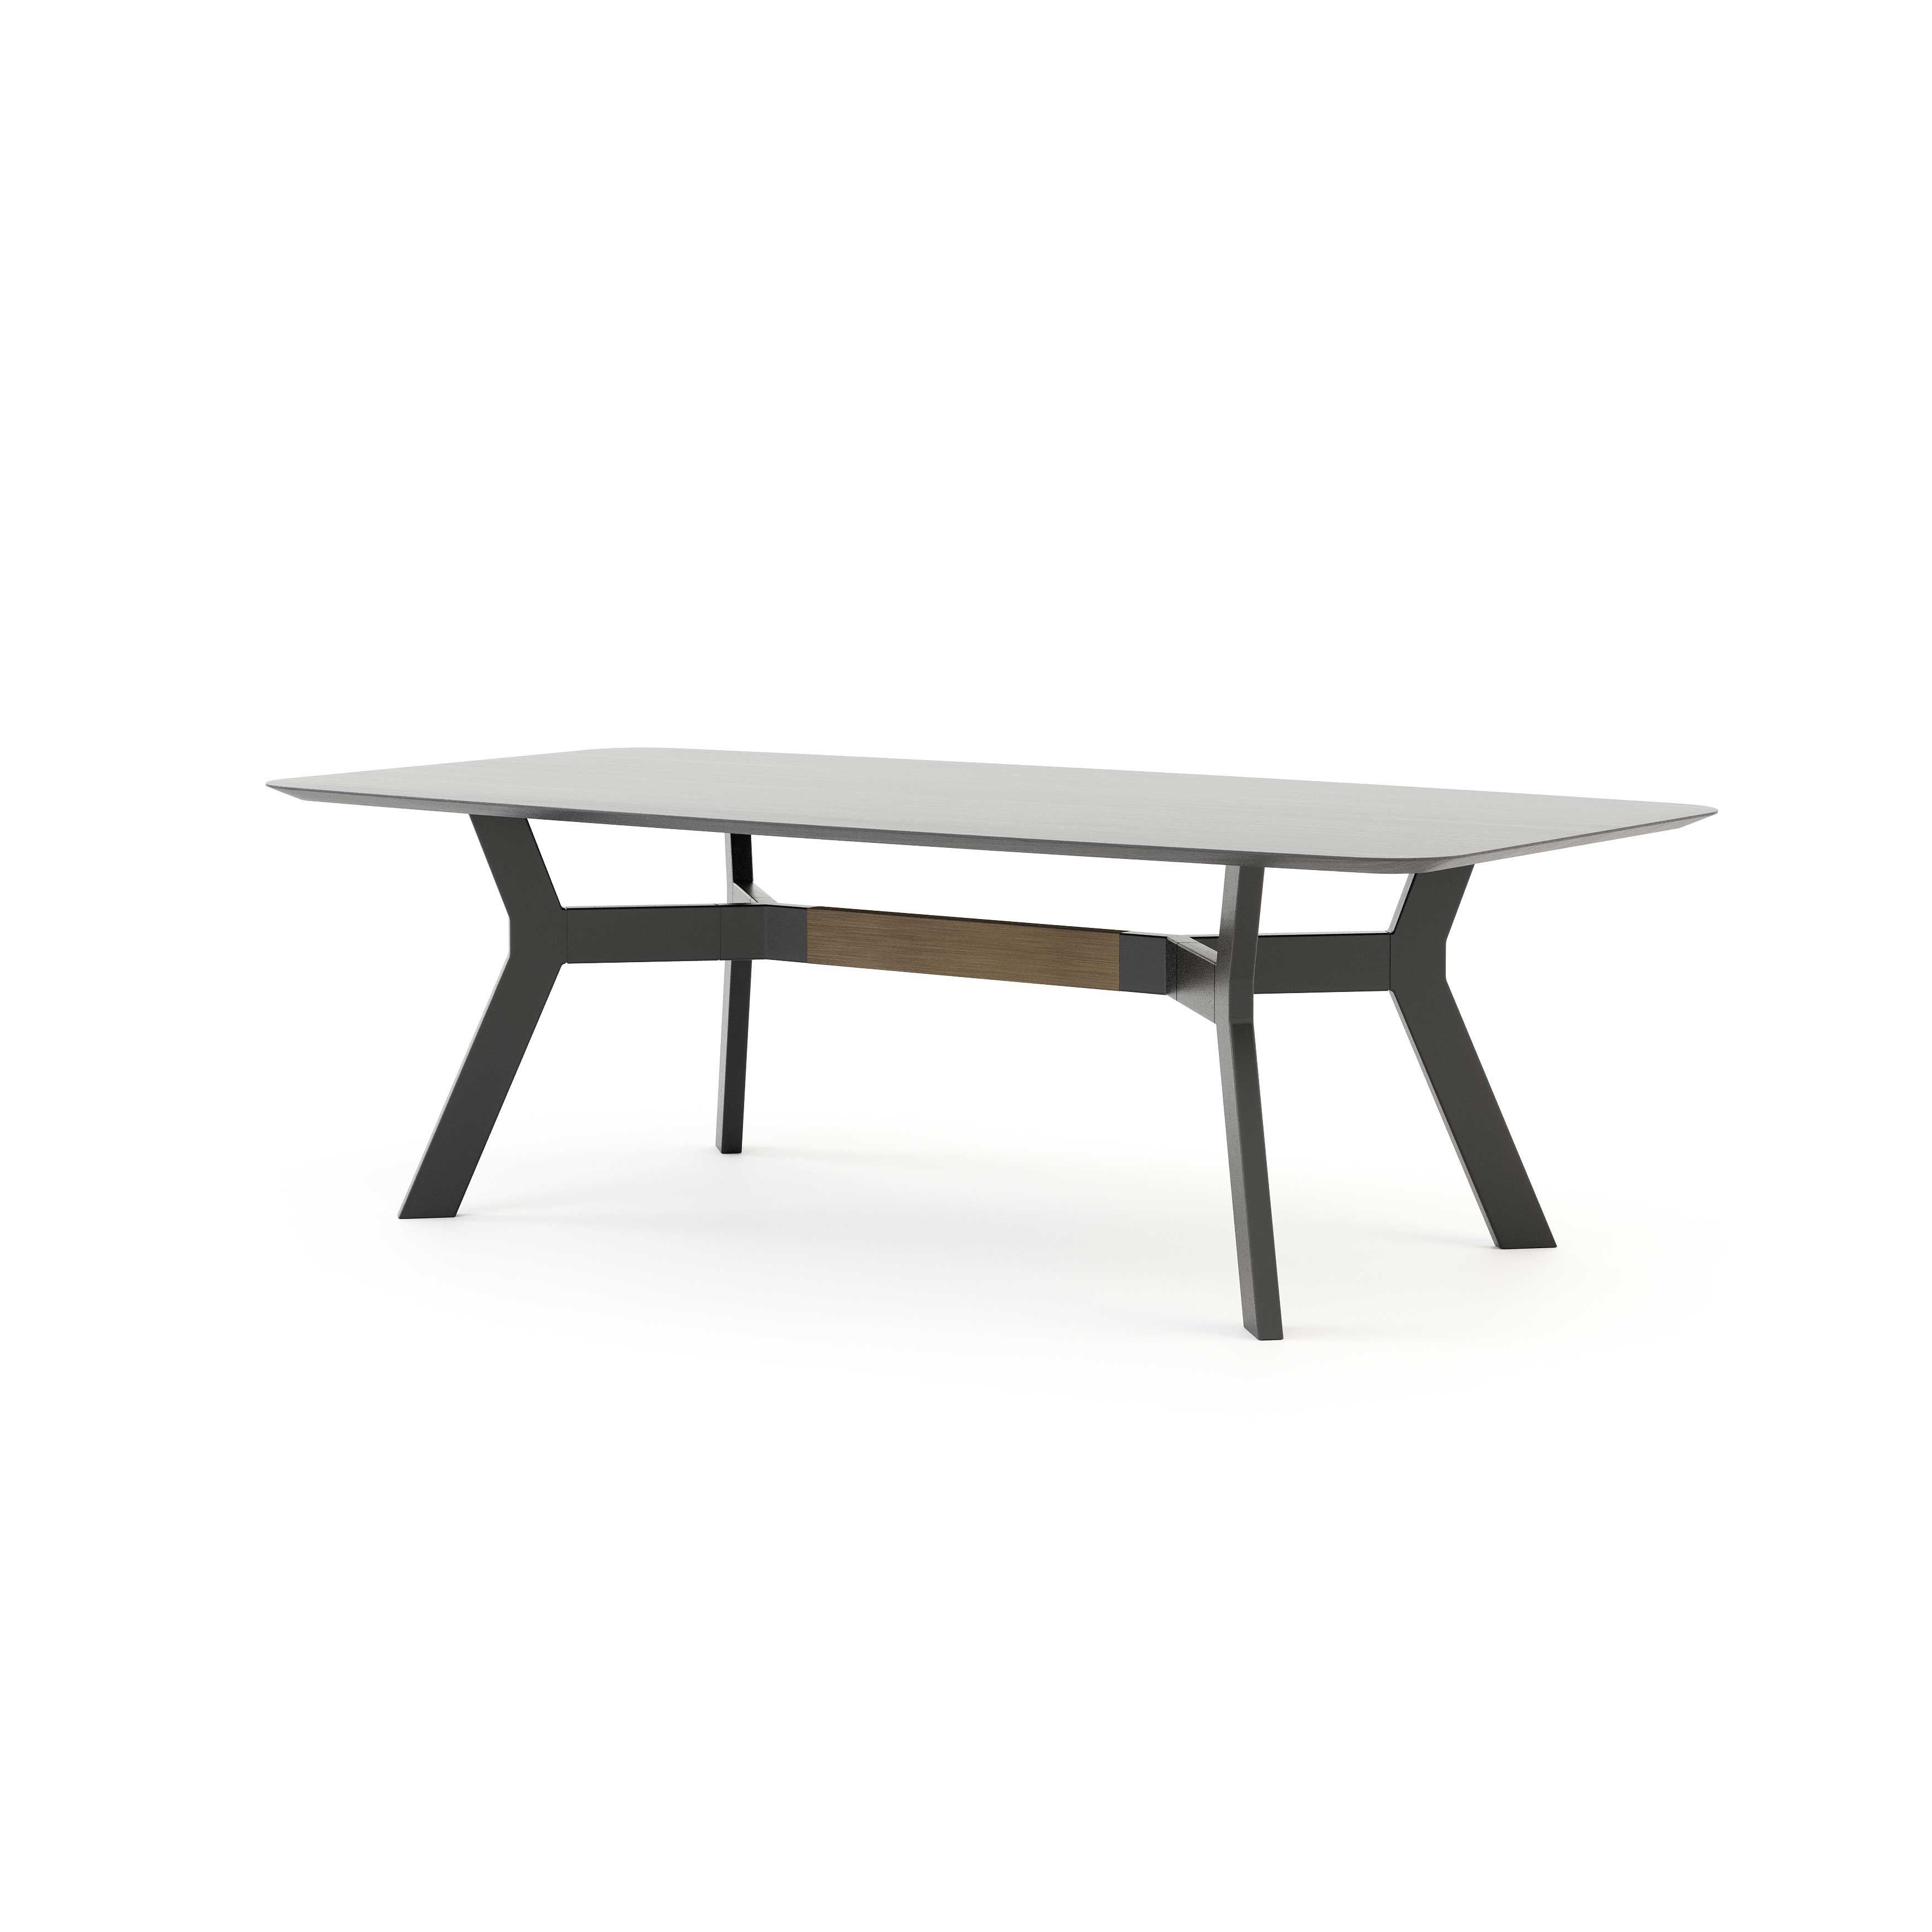 The Toro dining table embodies the spirit of innovation, inspiring the creation of a diverse selection of dining tables in the world of design. Its elegant and timeless design ignites creativity and sets a standard for excellence. The table’s